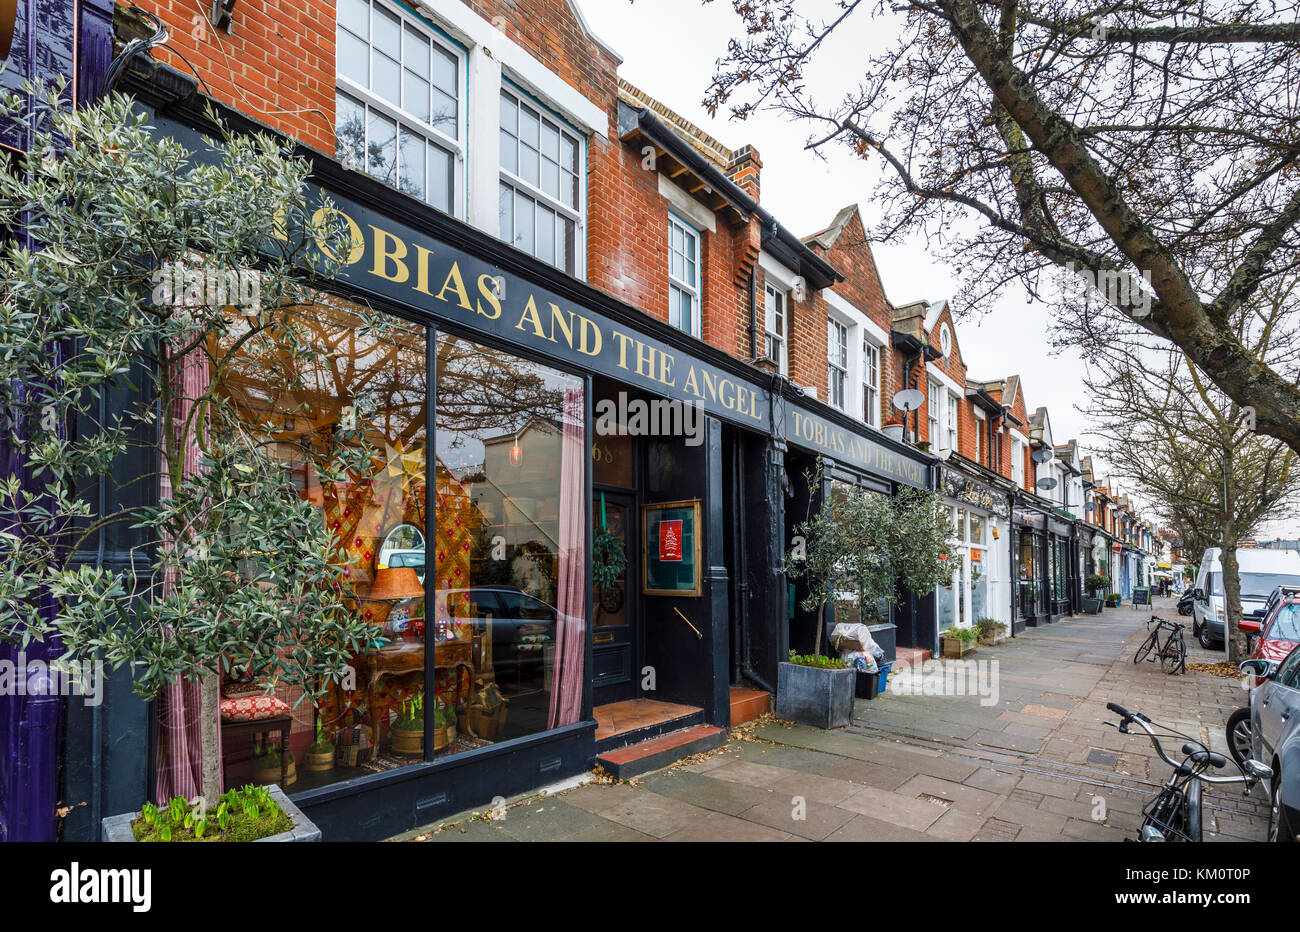 Tobias and the Angel shop front in Barnes, SW13, an affluent suburb of London, England, UK Stock Photo